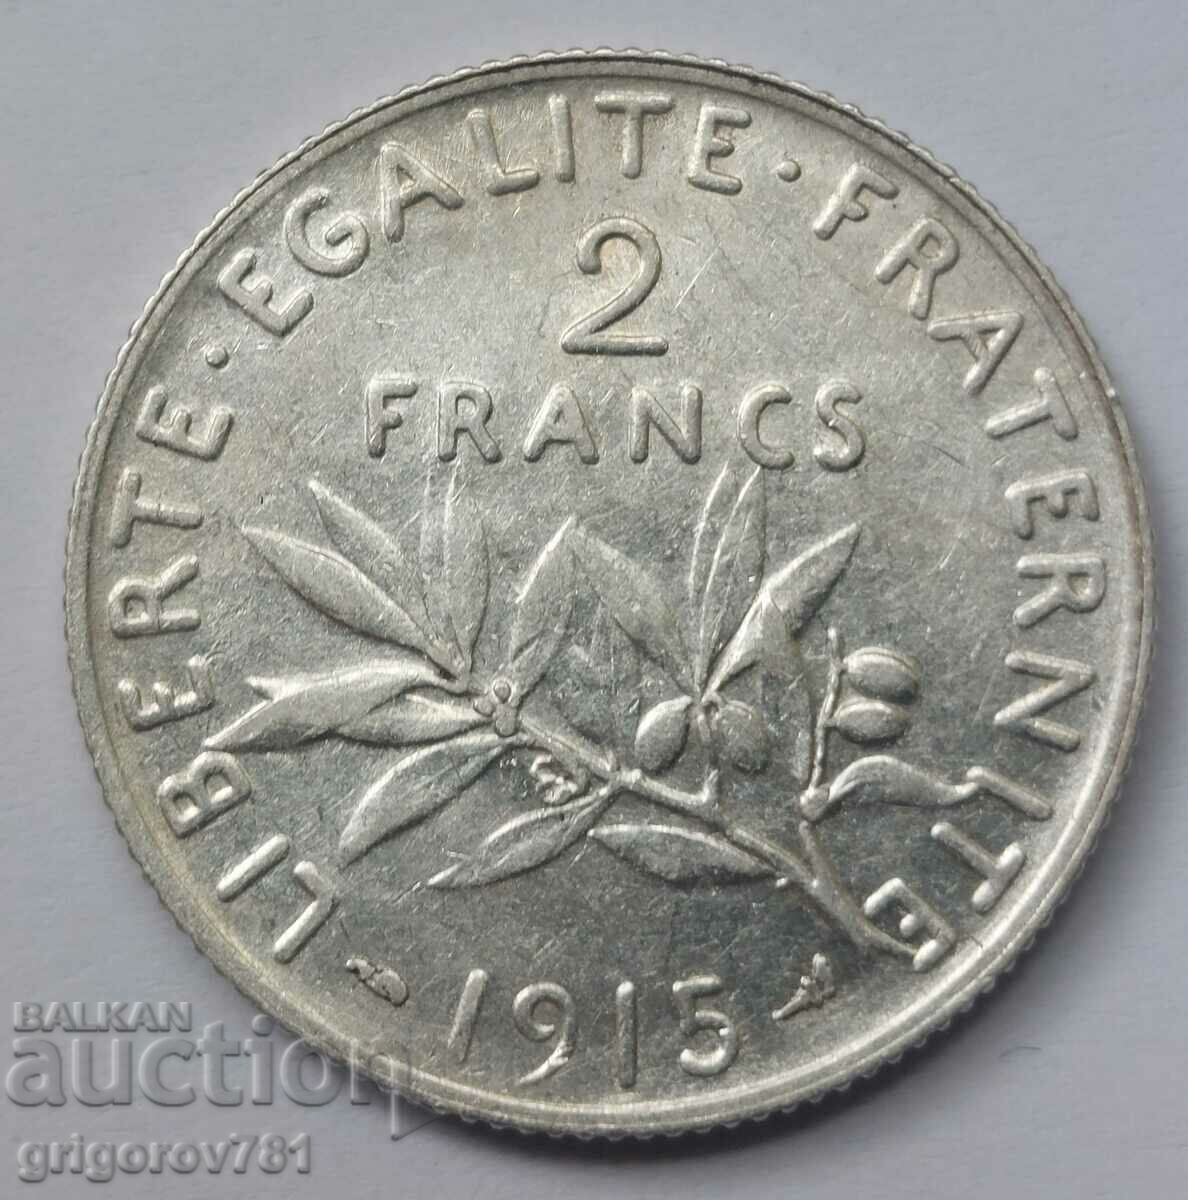 2 Francs Silver France 1915 - Silver Coin #64